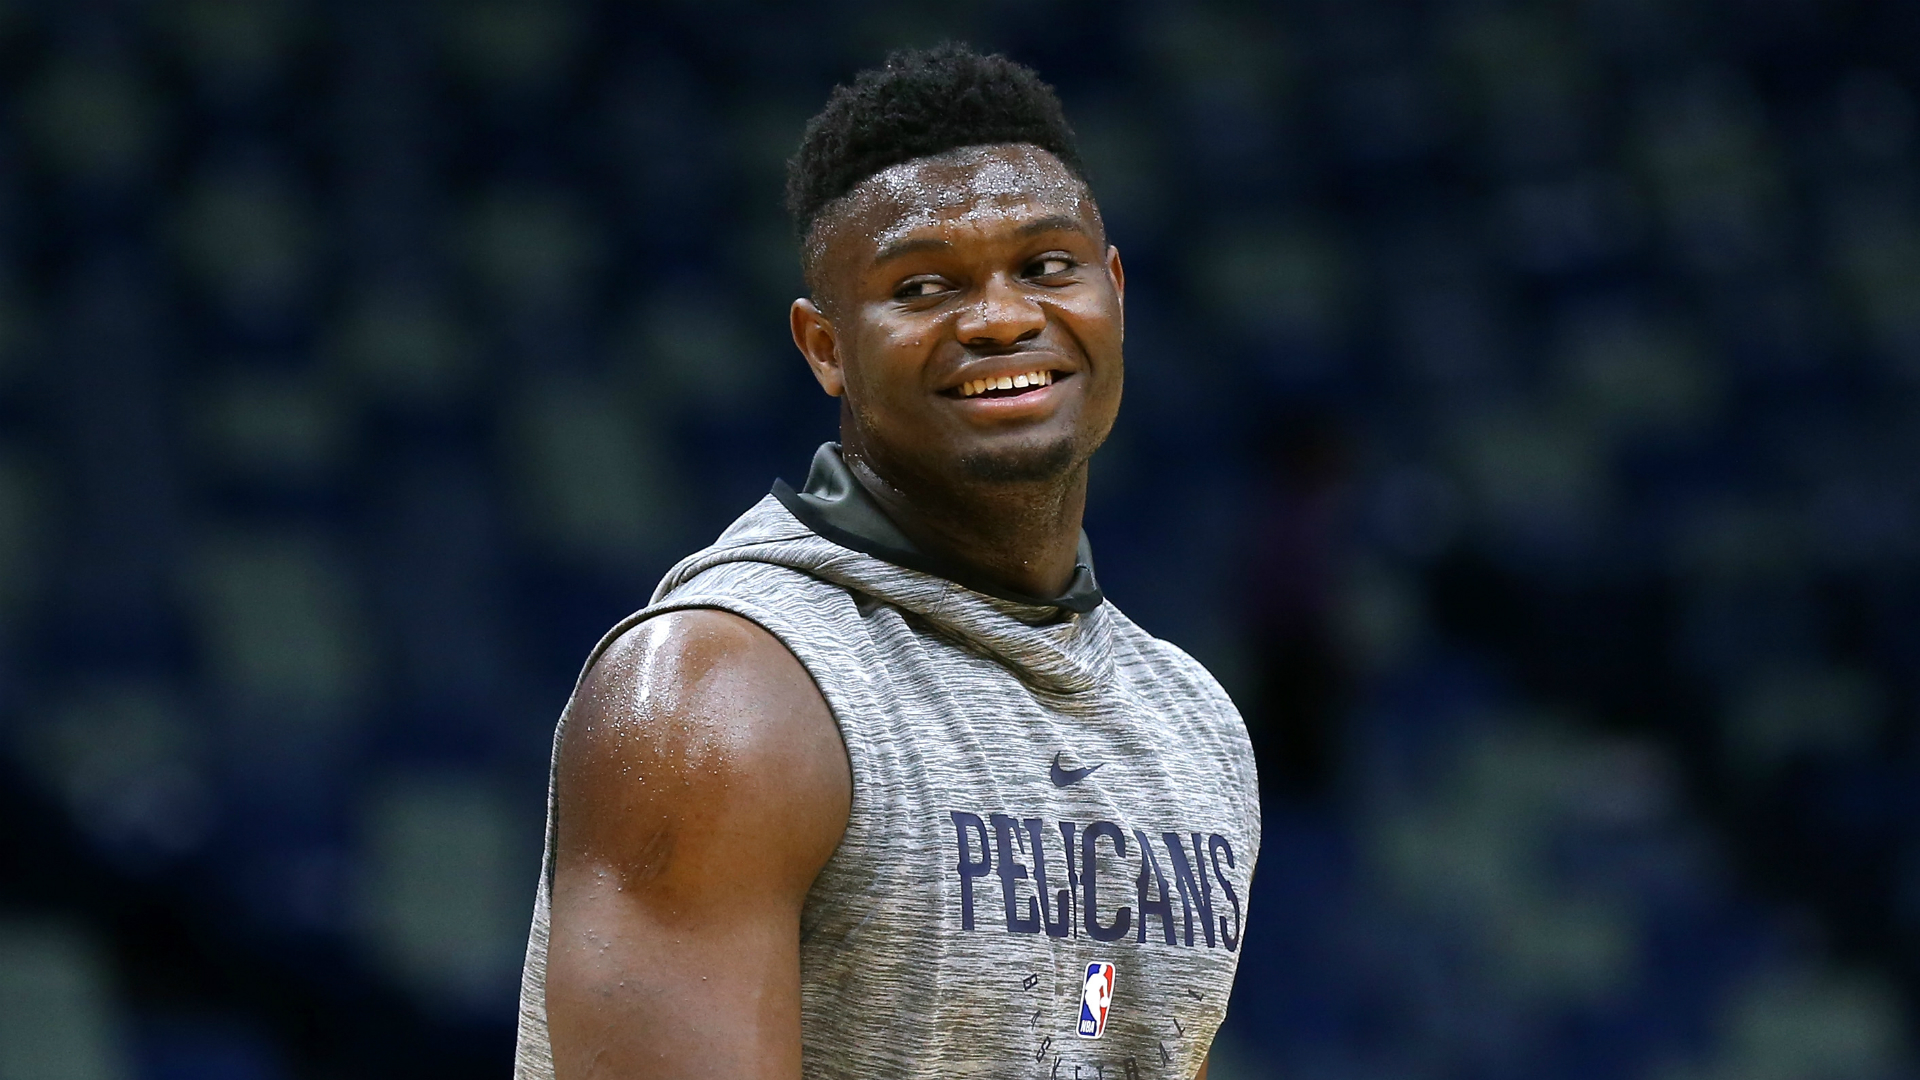 The New Orleans Pelicans will face the New York Knicks on Friday without young star Zion Williamson, it was announced on Thursday.